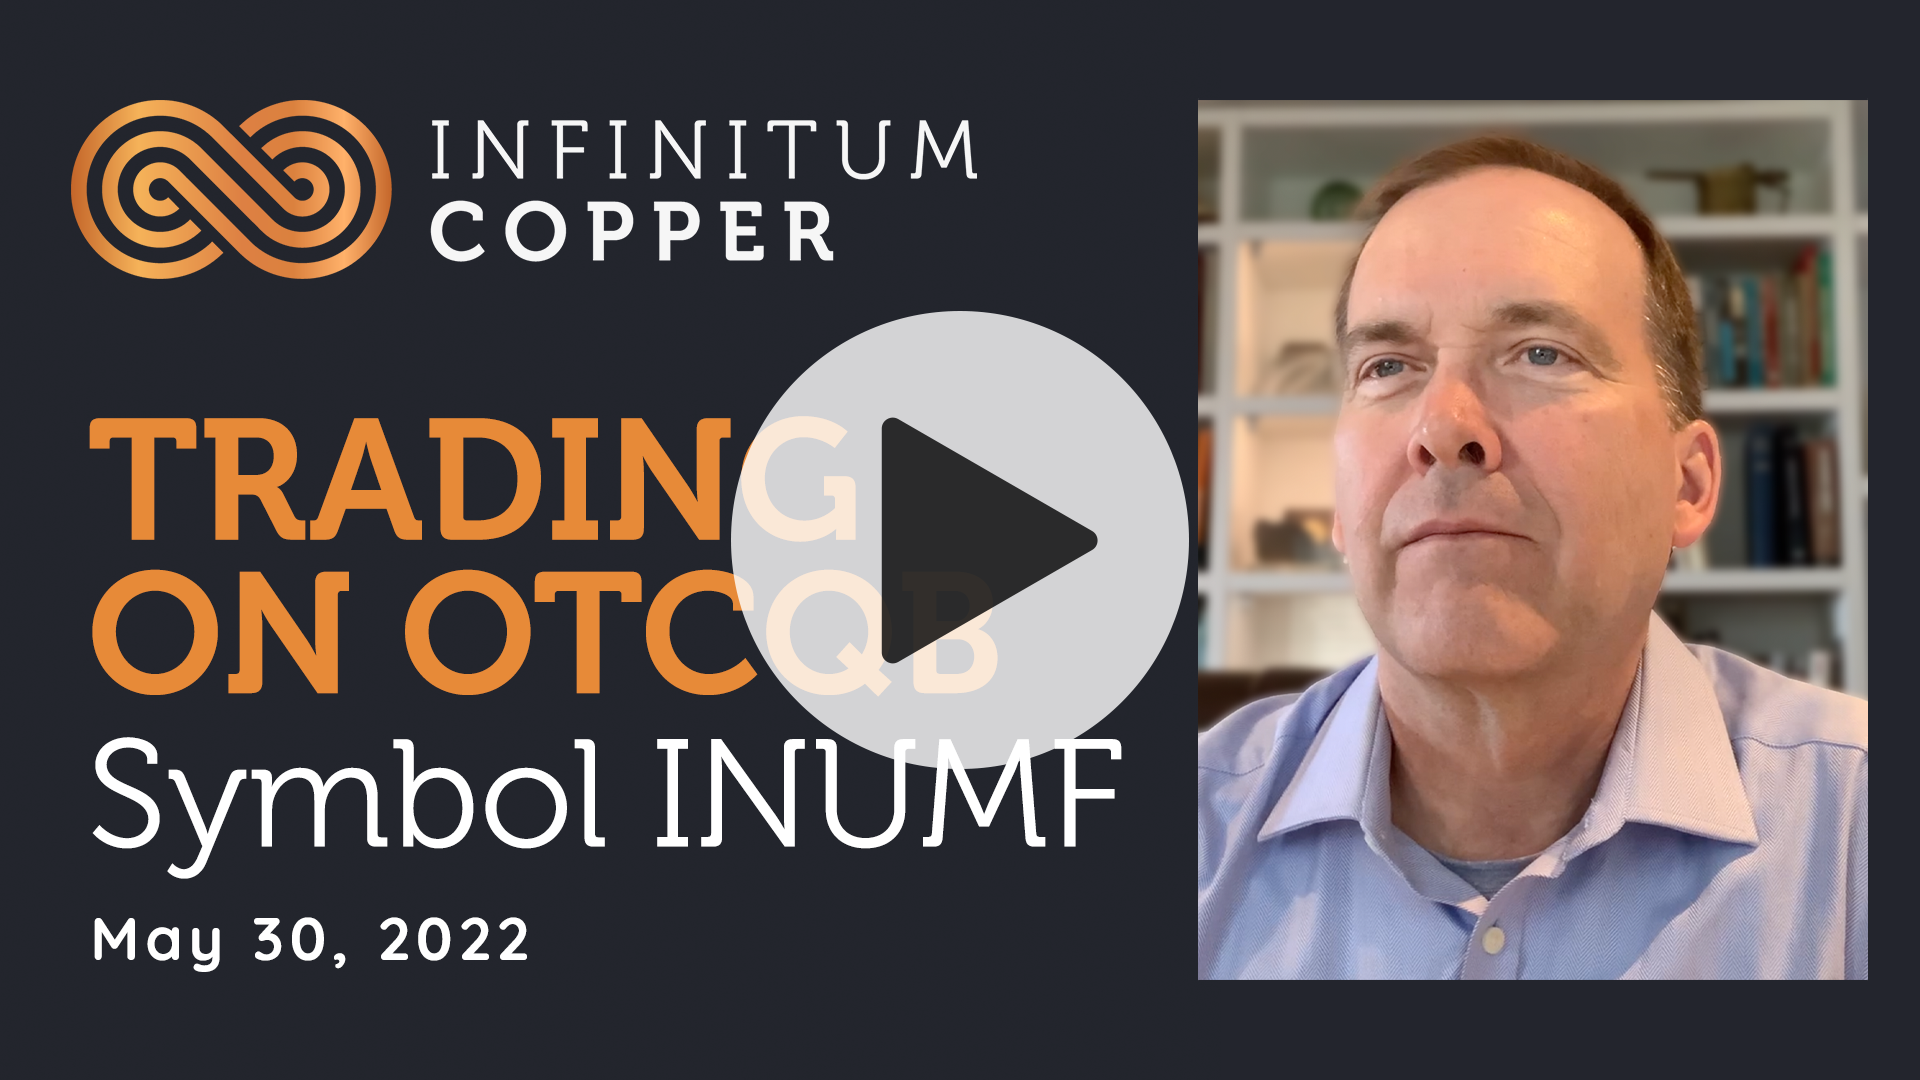 Infinitum Copper, Monday, May 30, 2022, Press release picture